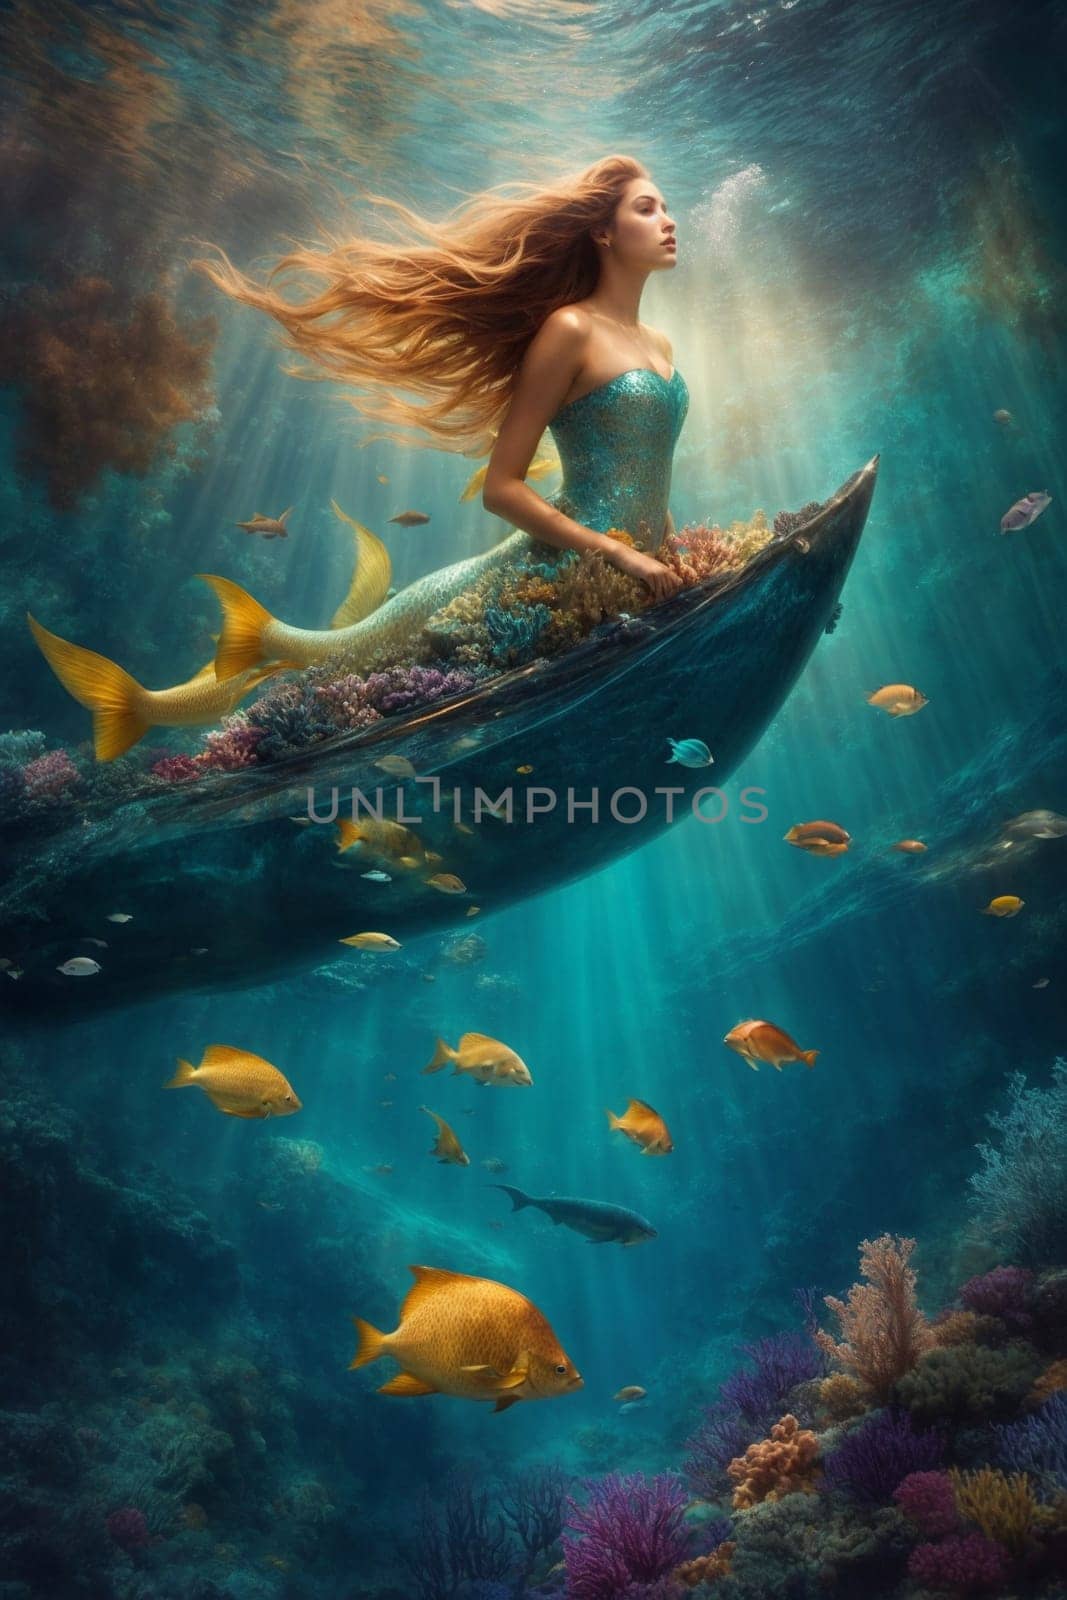 A woman calmly sits on top of a boat submerged underwater, defying gravity and showcasing the surreal beauty of the aquatic world.